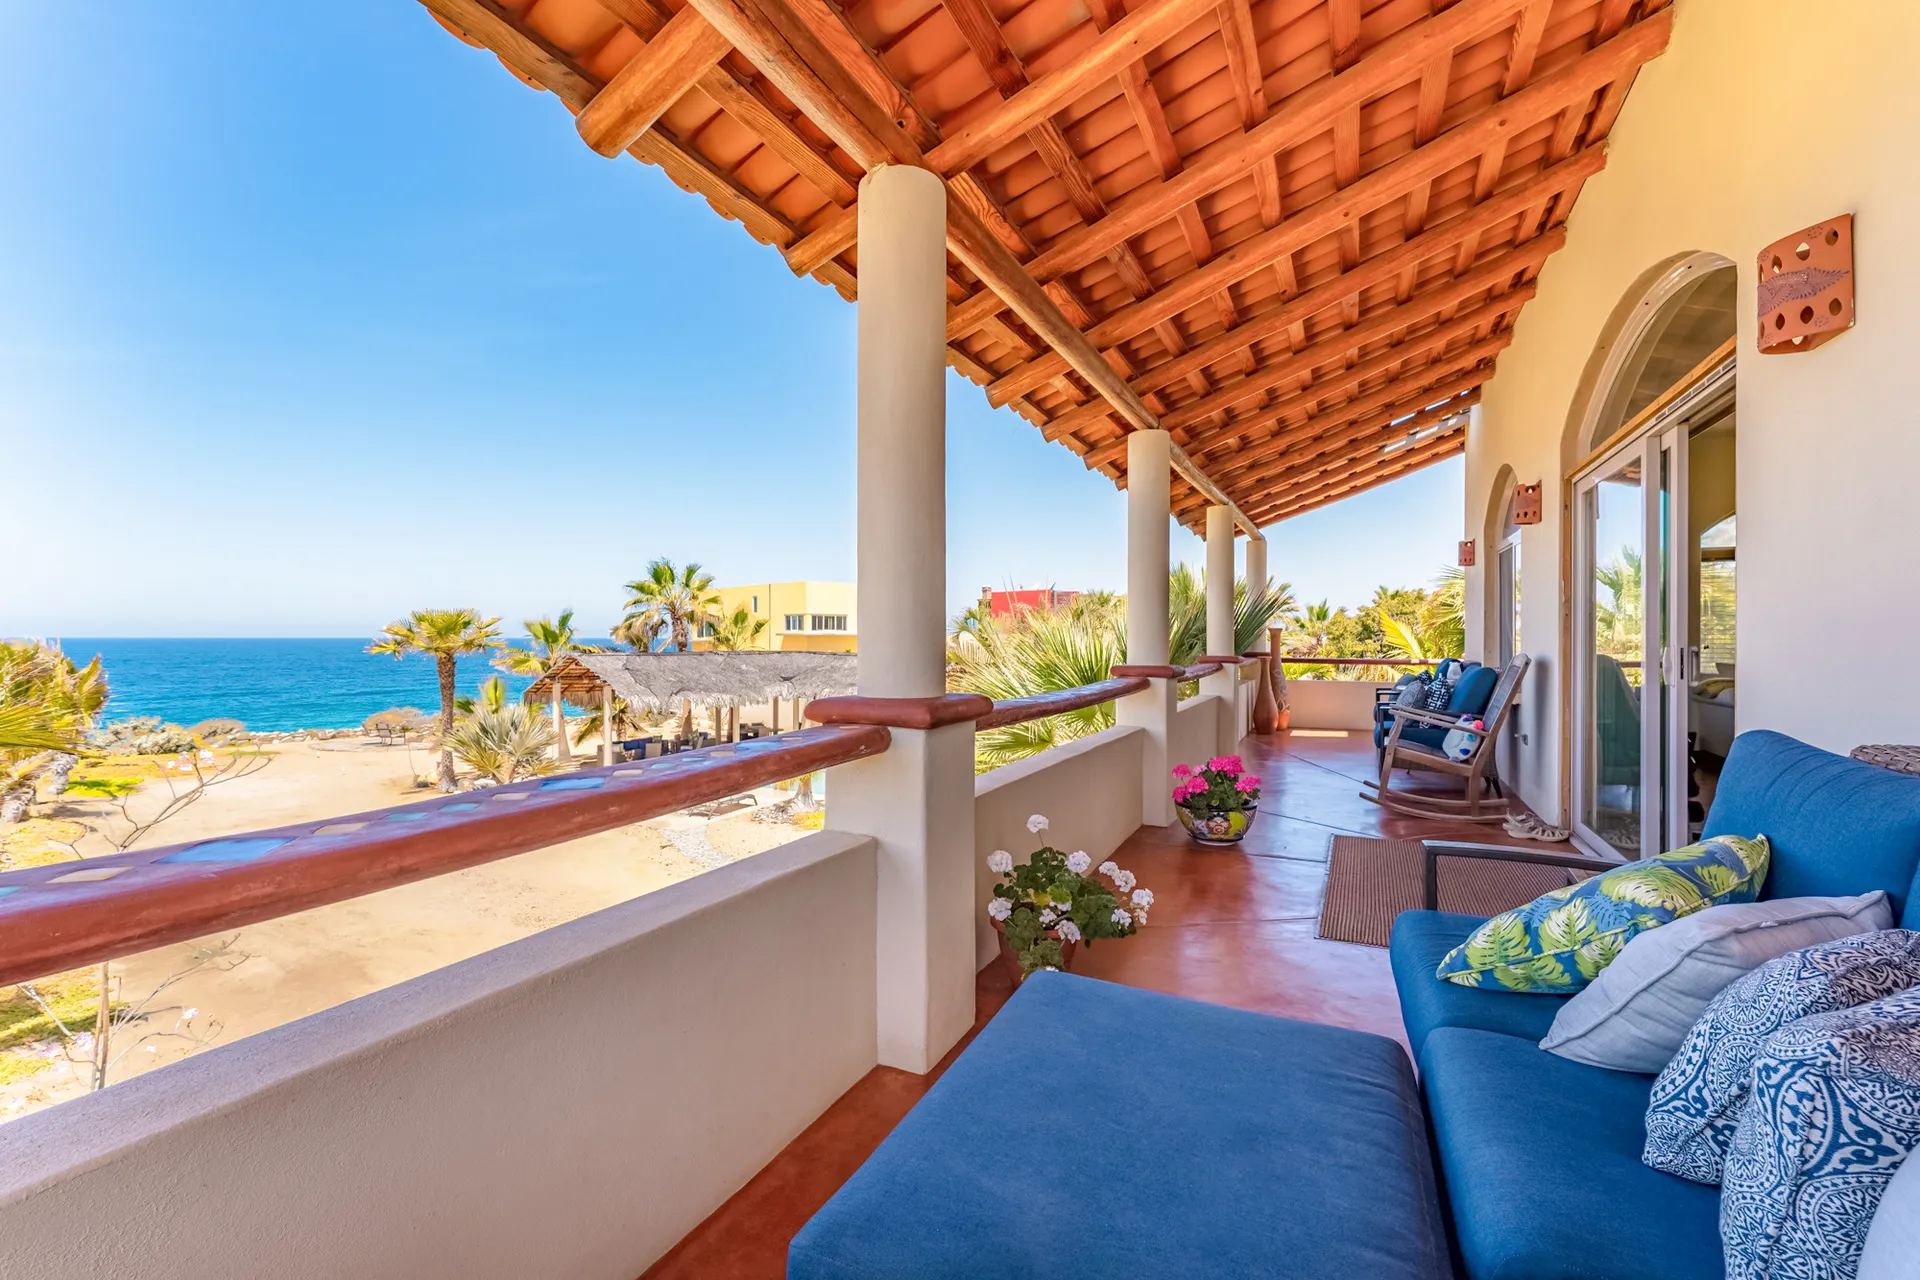 Forty-five minutes from downtown Cabo San Lucas, discover a rare opportunity to acquire an oceanfront property in prestigious Rancho Nuevo